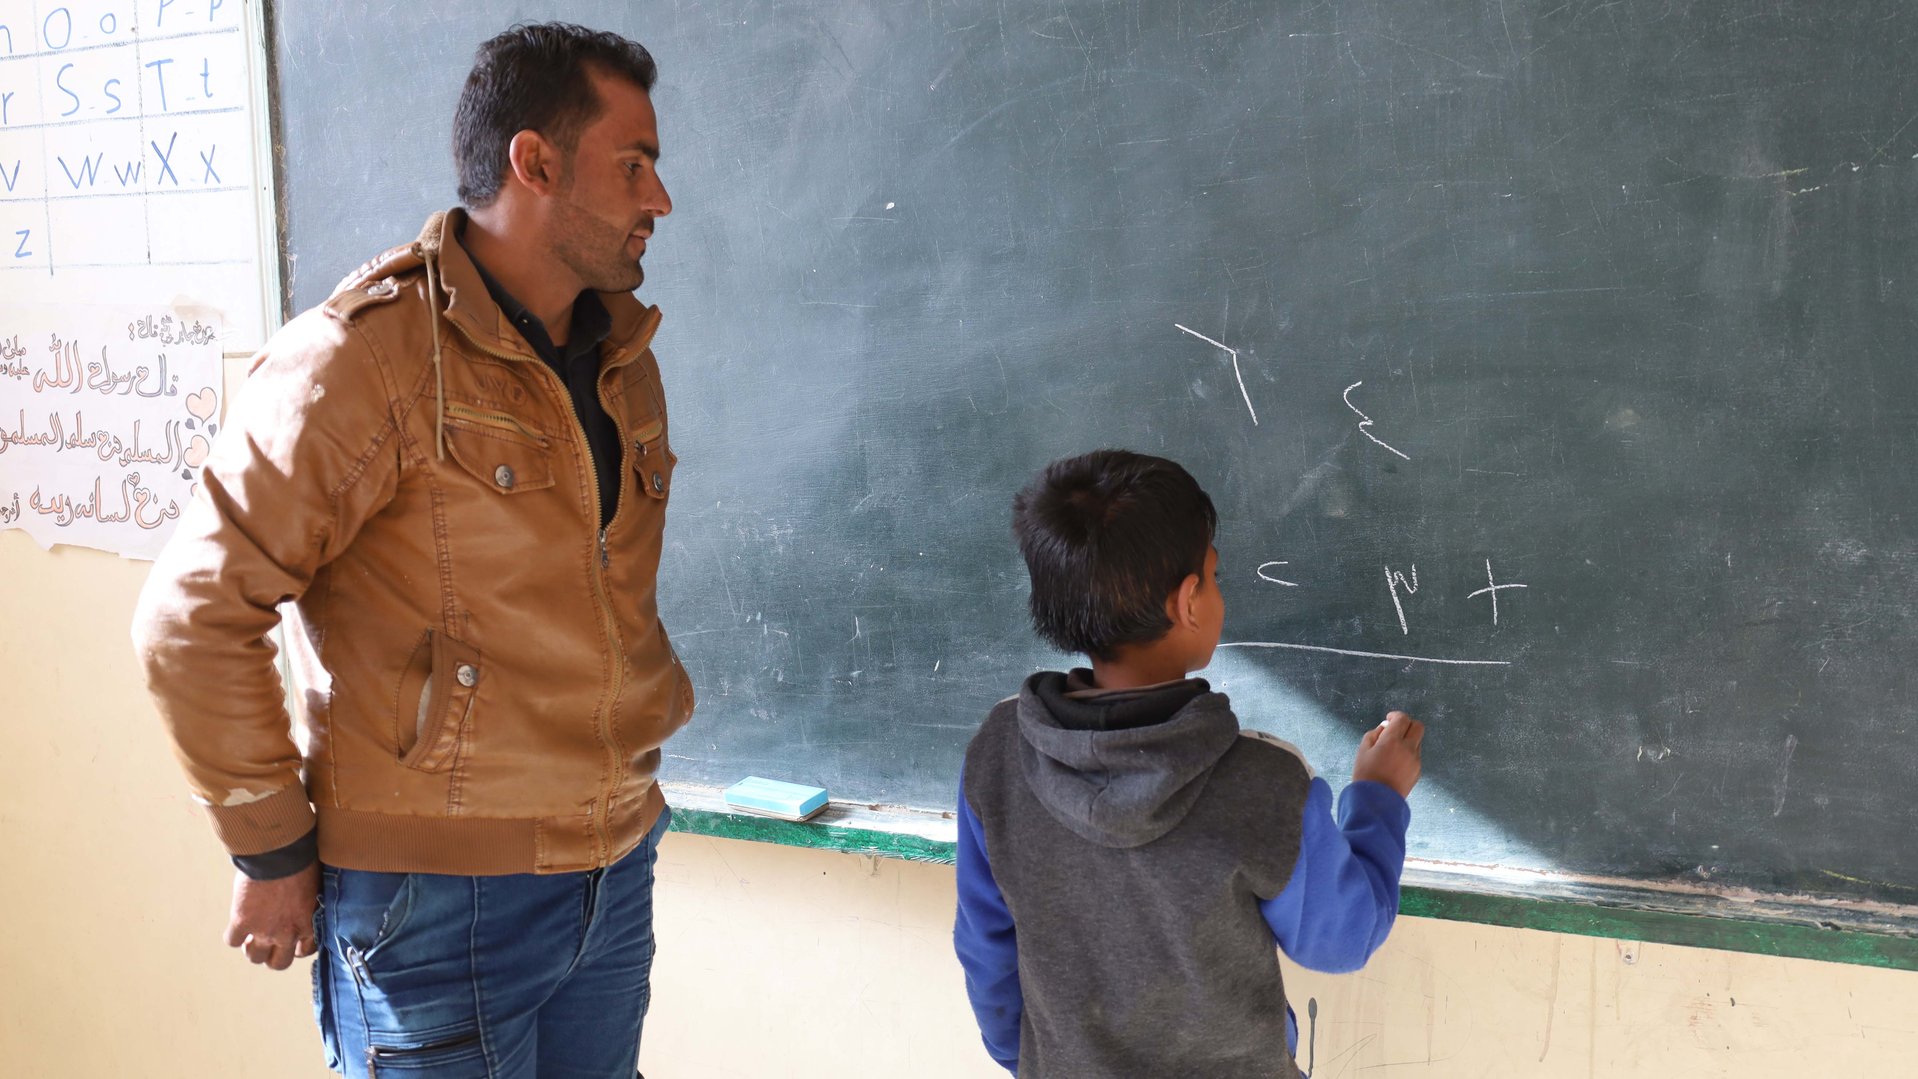 Muhammad, 9 years old, with his teacher at the chalkboard, as part of War Child's Syria Response